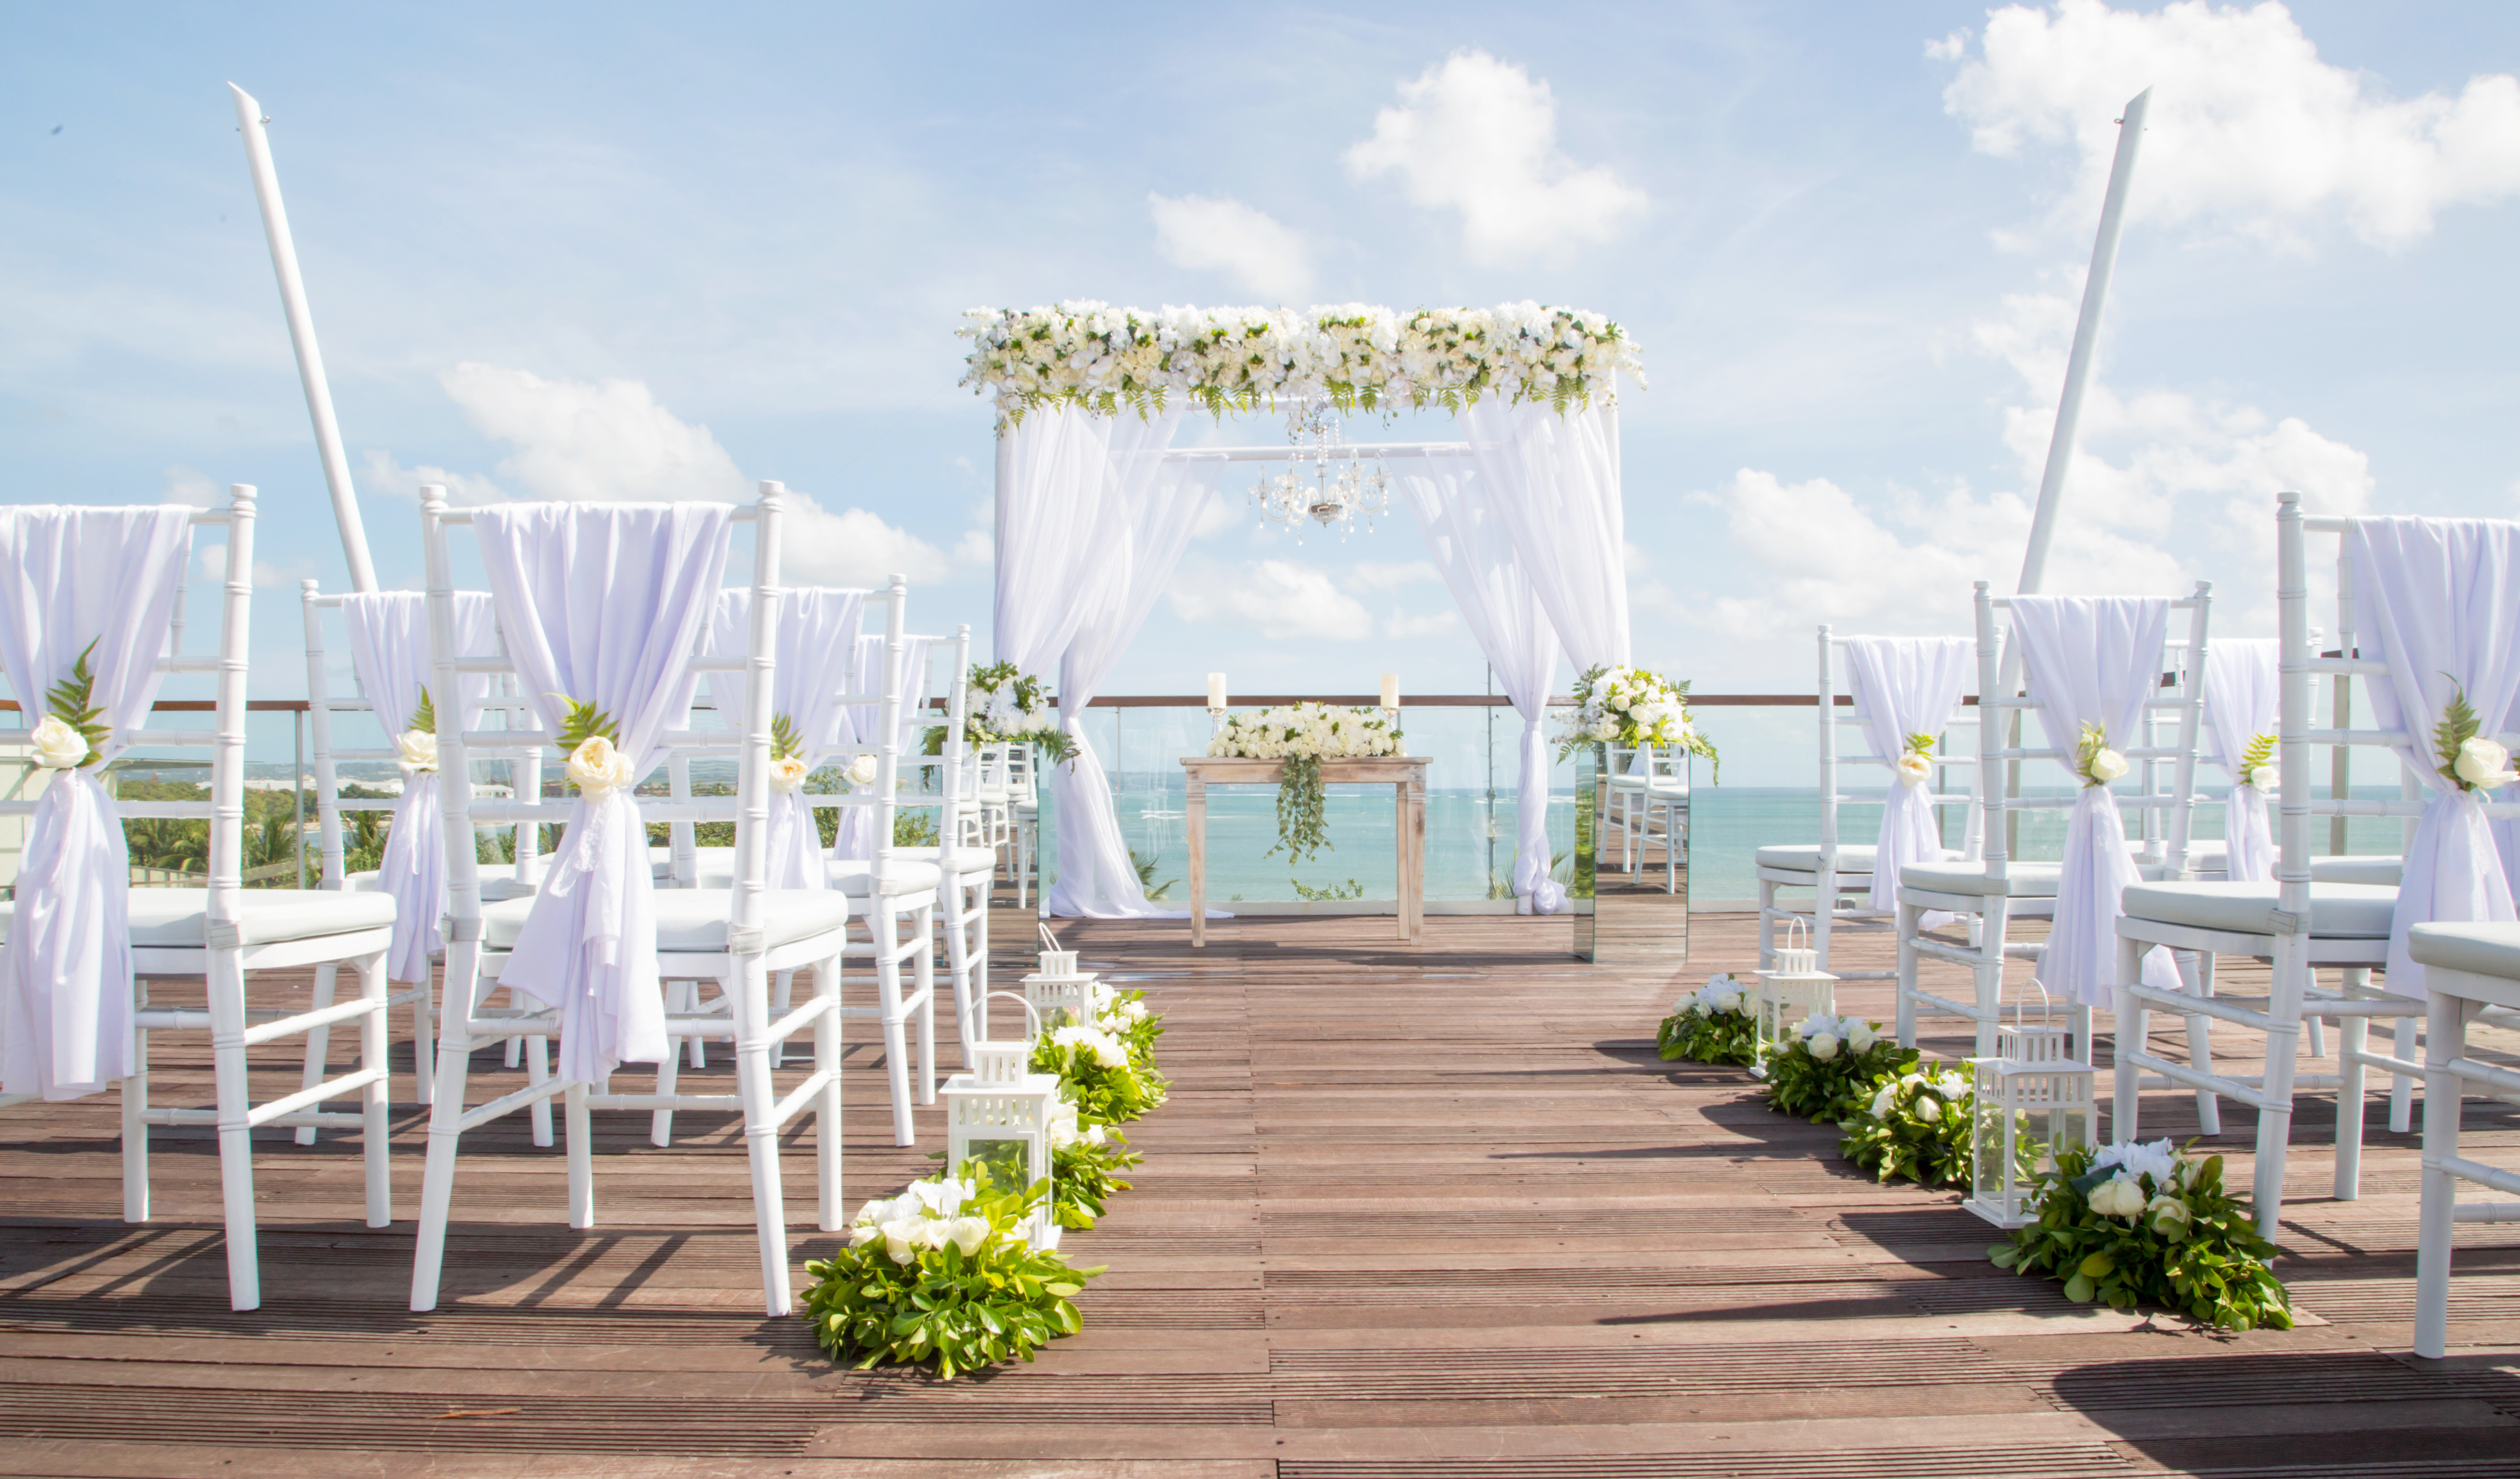 Rows of chairs set up for a tropical seaside wedding ceremony as part of the 2023 wedding trend for destination weddings